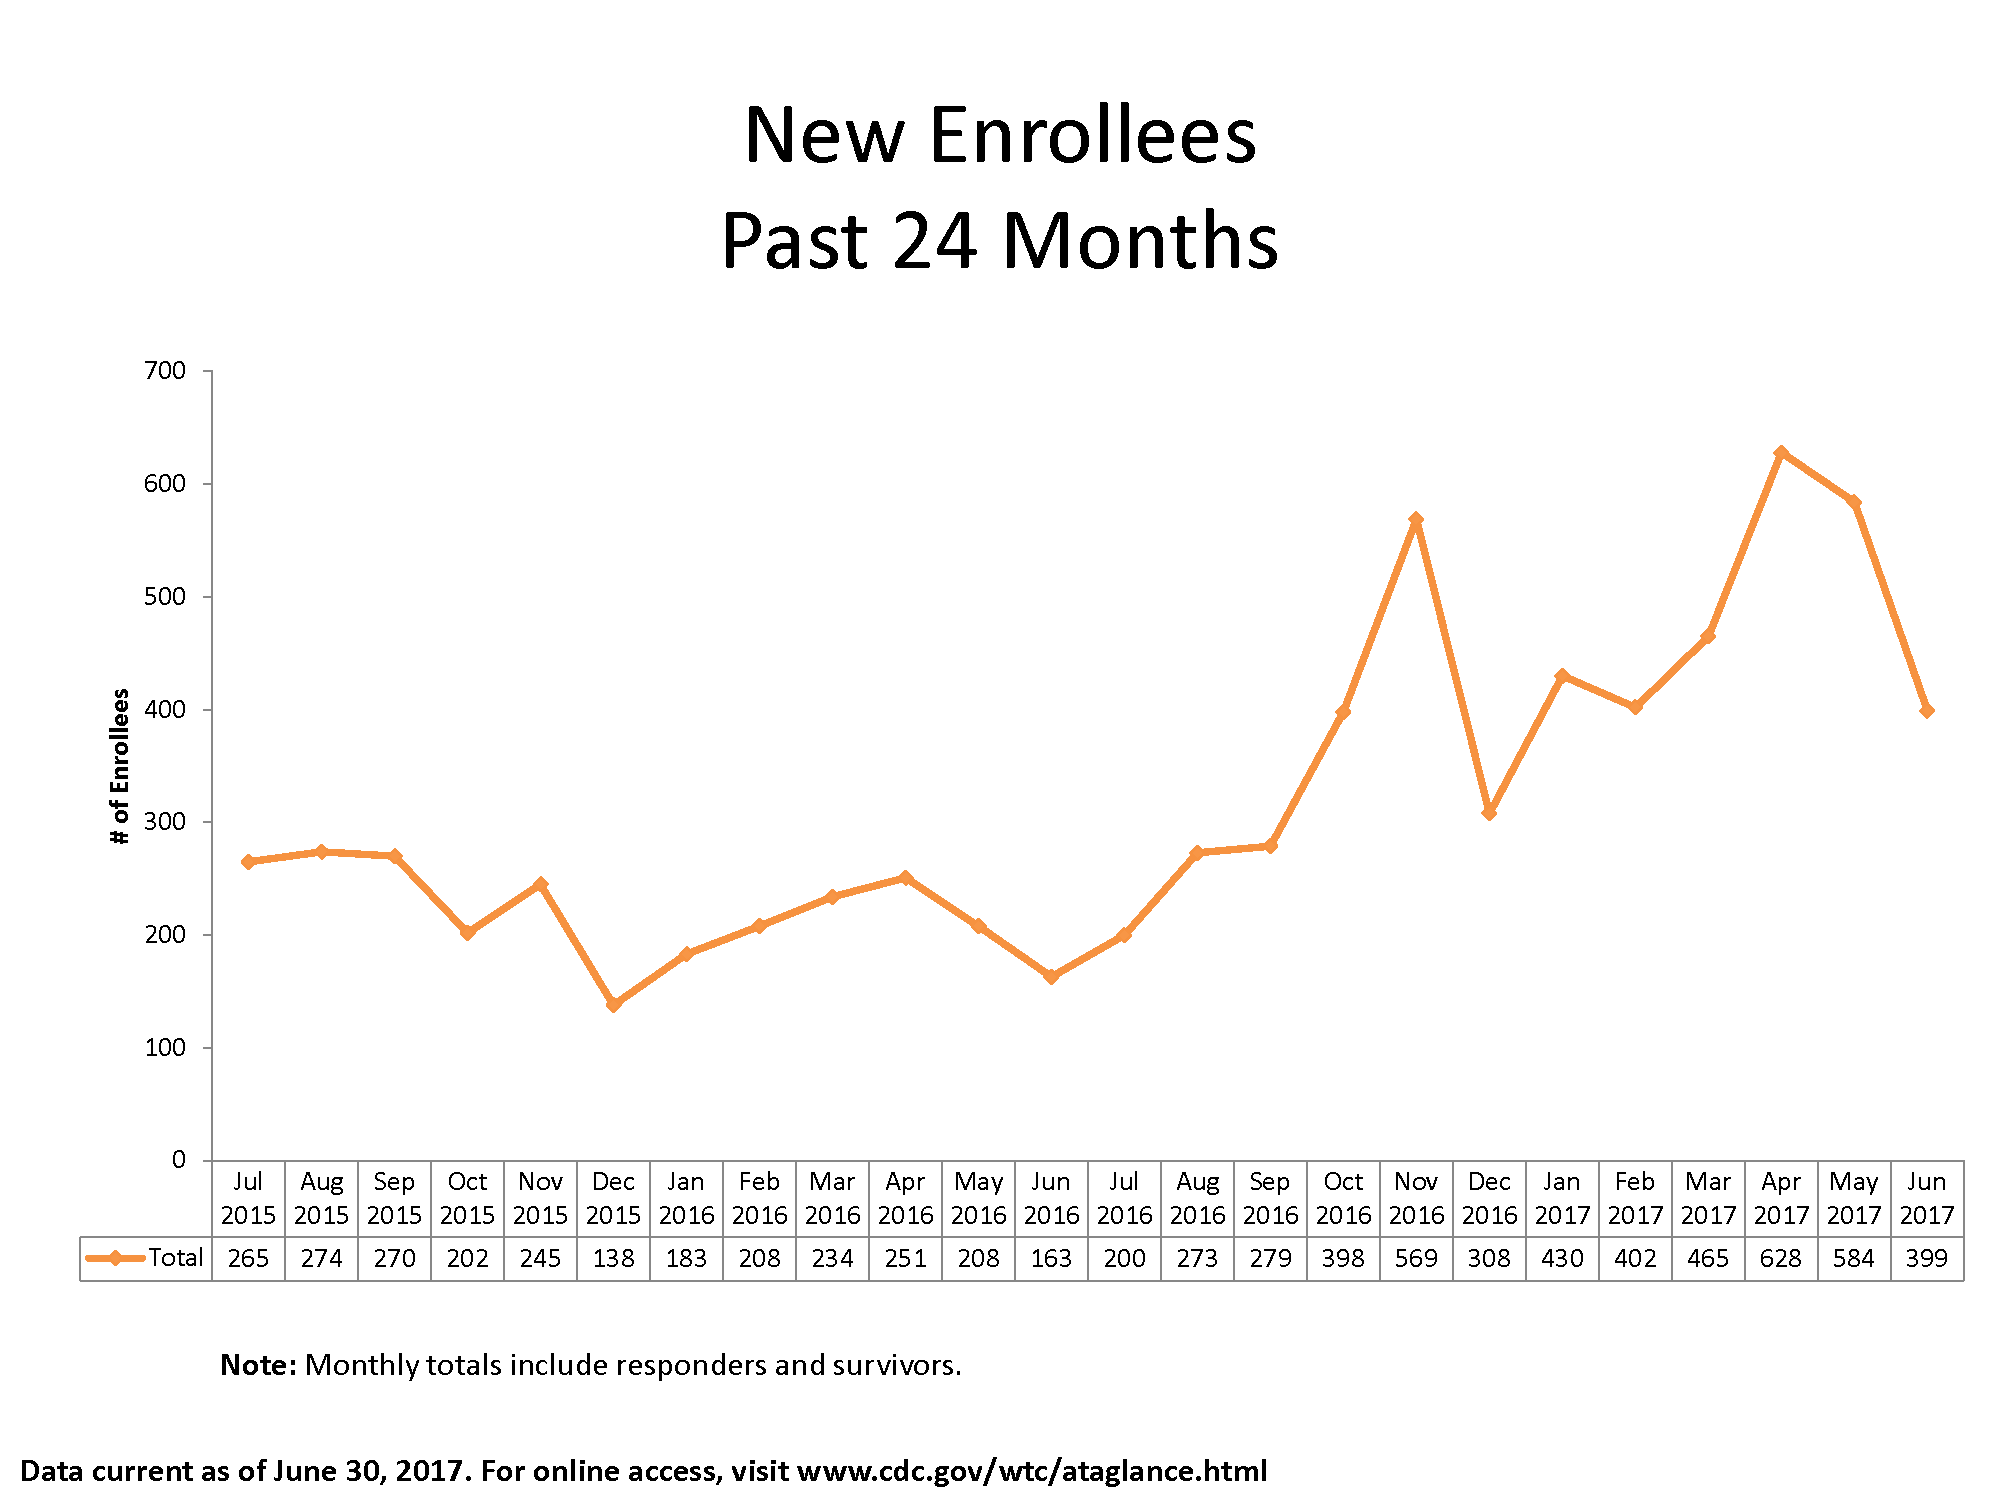 Line graph of data in table showing newly enrolled members by month from April 2015 through June 2017.